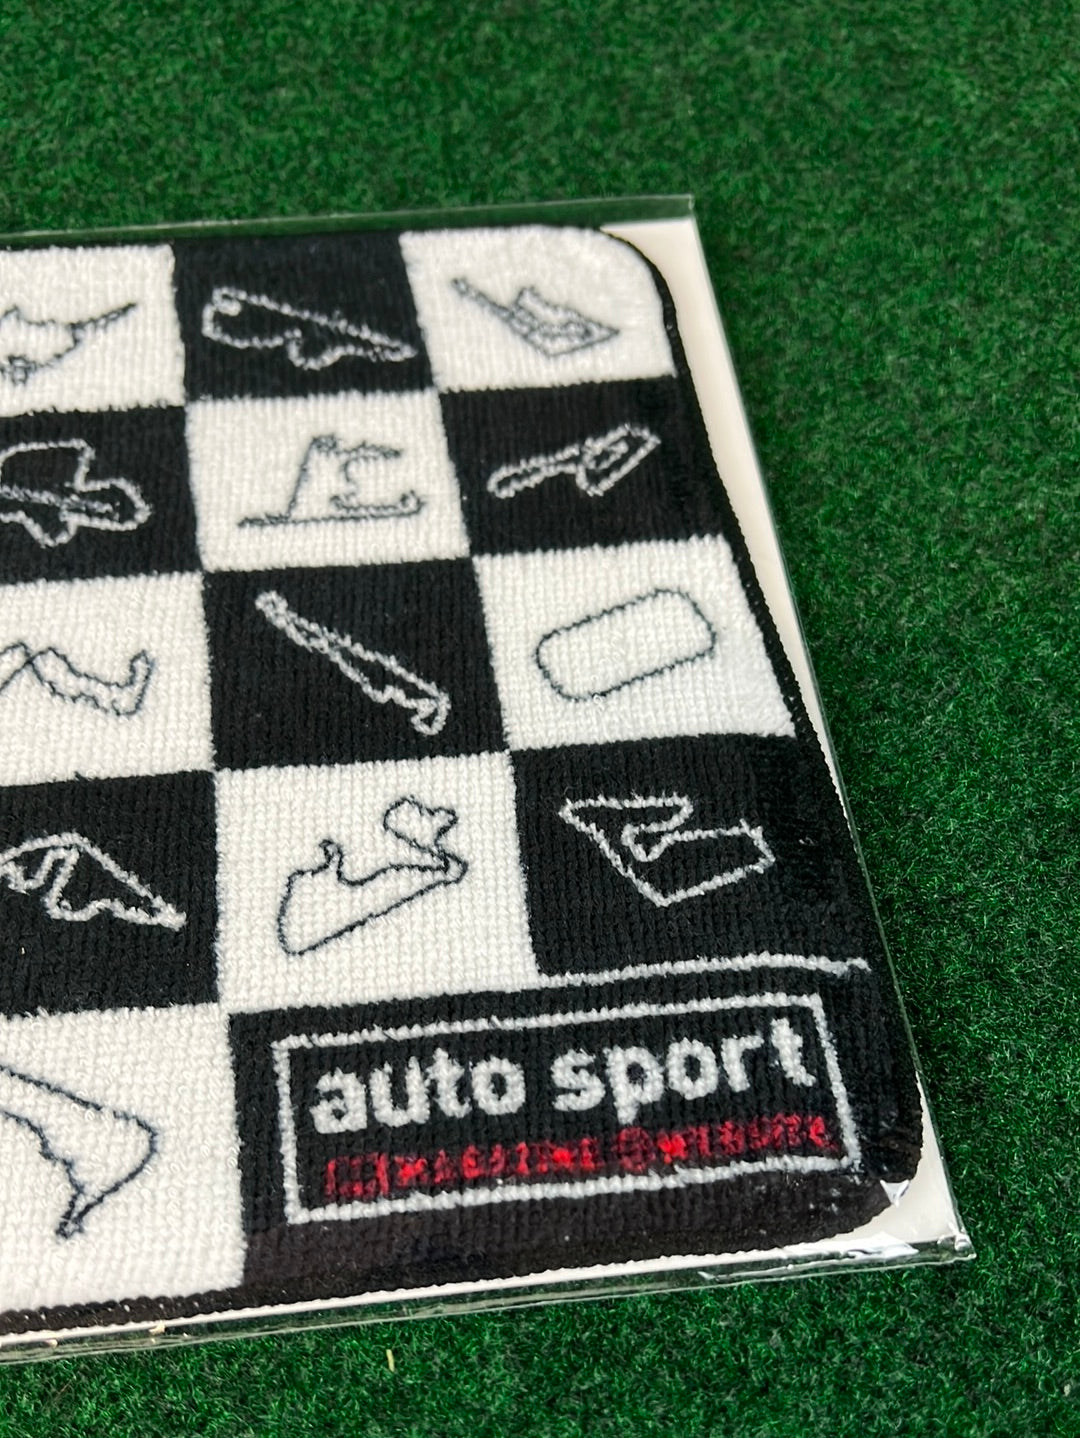 Personal Towel Auto Sport Magazine - Motor Racing Circuits Images